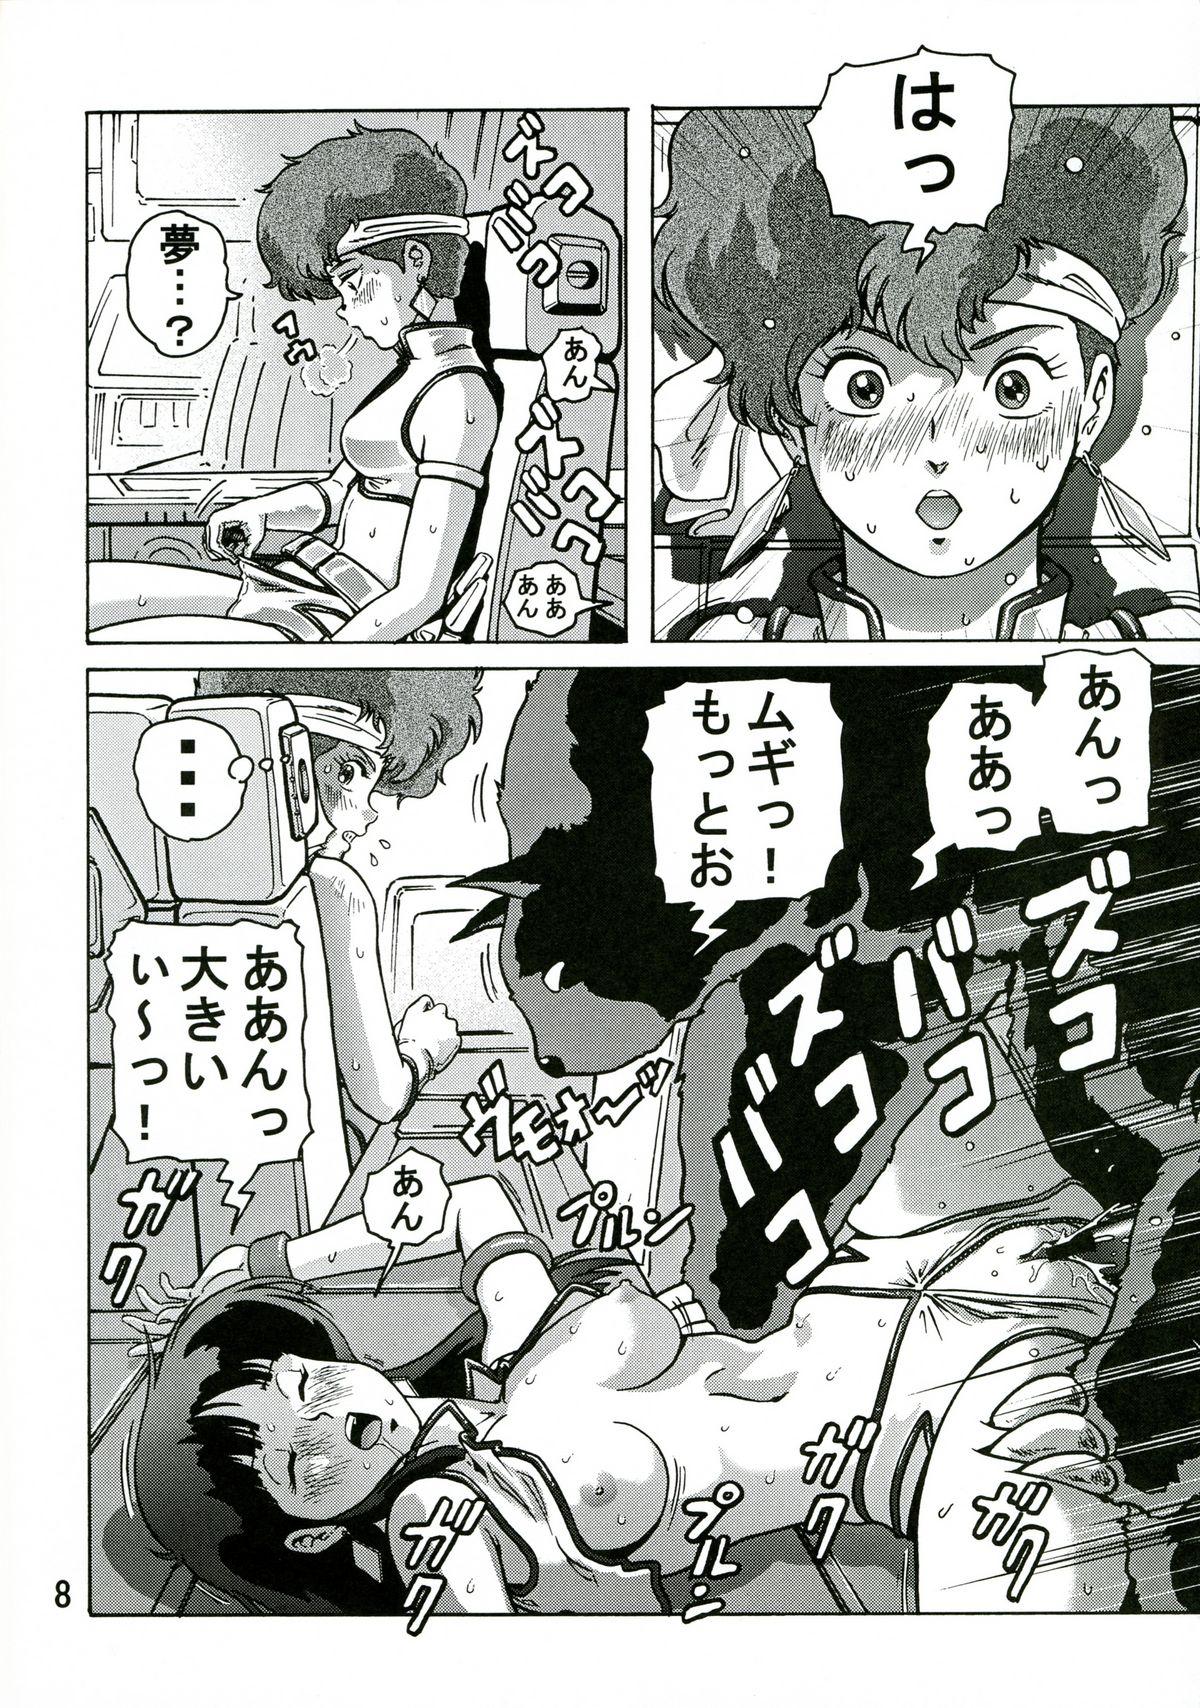 Jacking Off Love Angel 2 - Dirty pair Gay Medic - Page 7